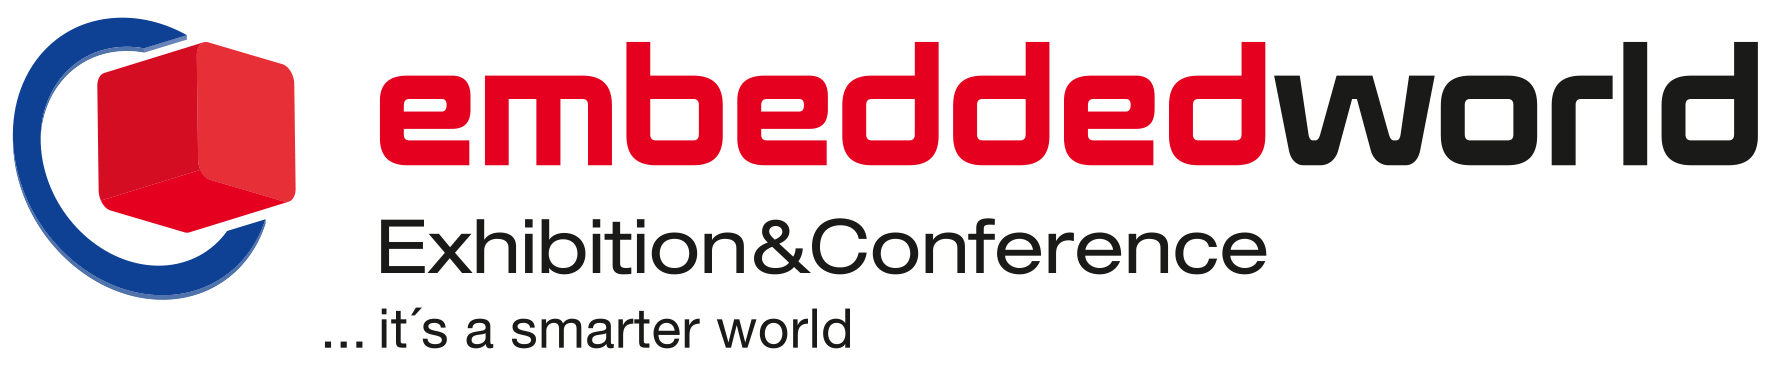 embedded world exhibition & conference